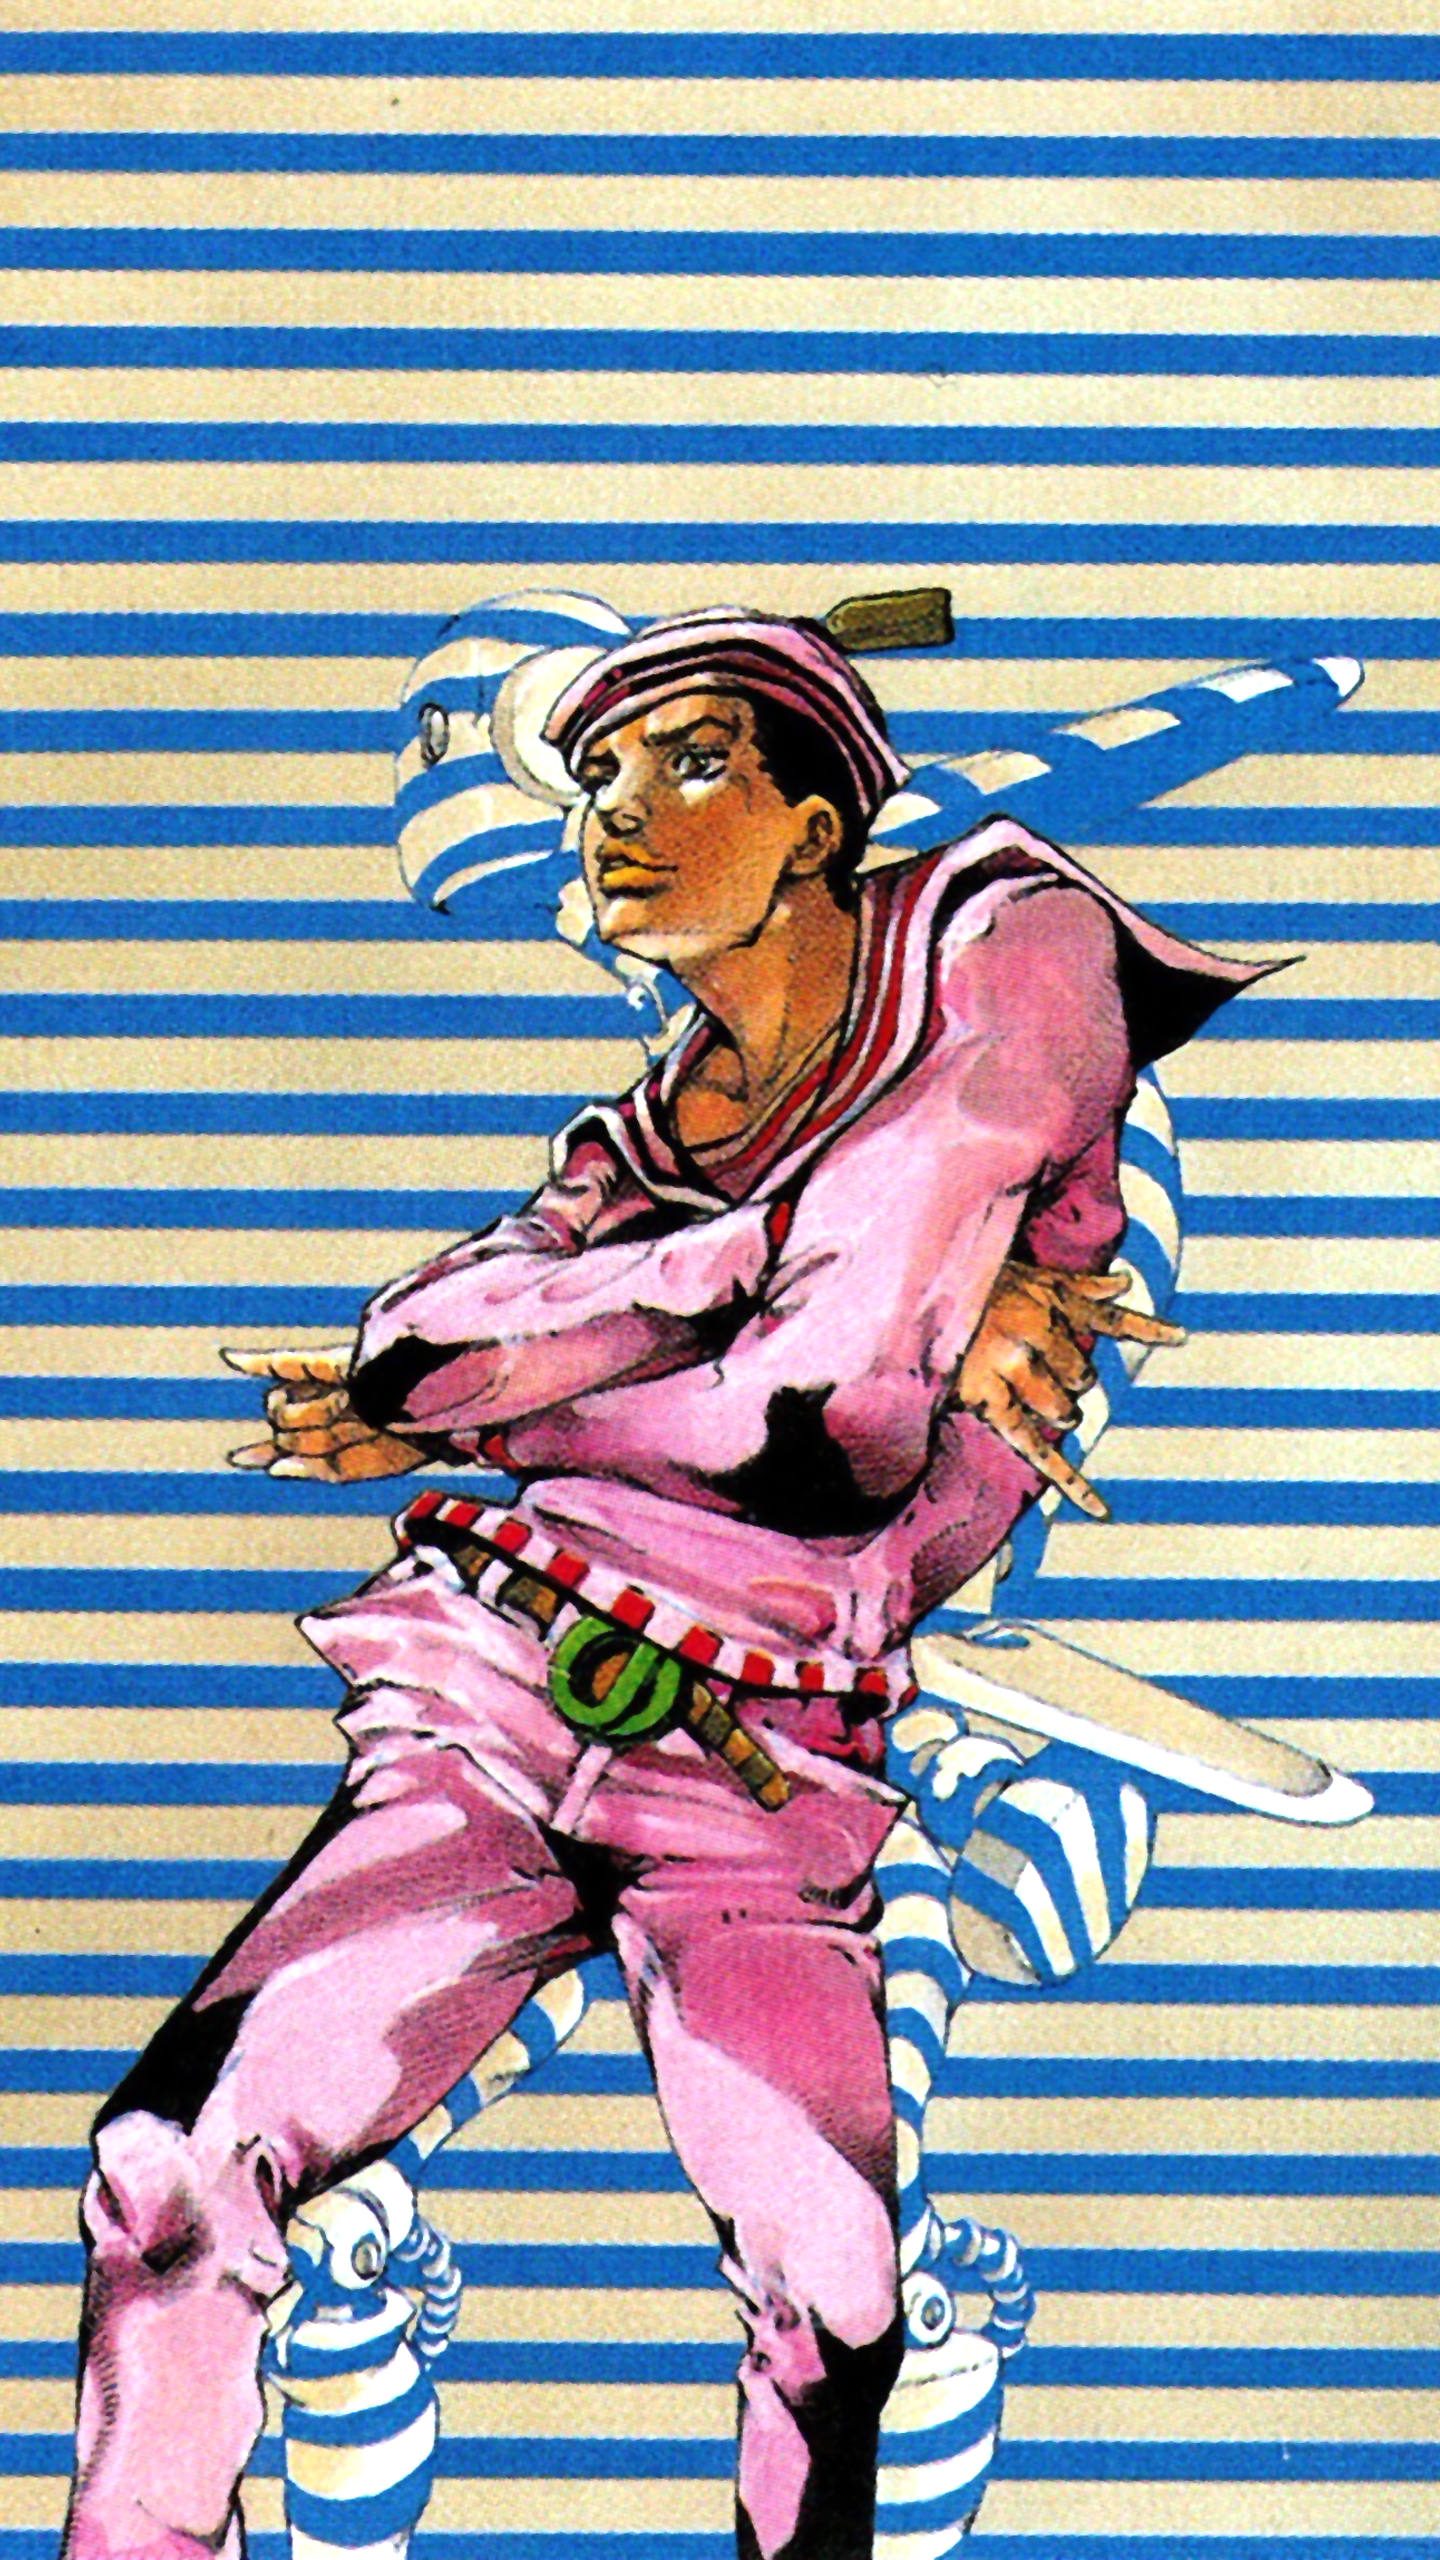 Posting a wallpaper a day until stone ocean is animated day 62: Josuke and Soft & Wet